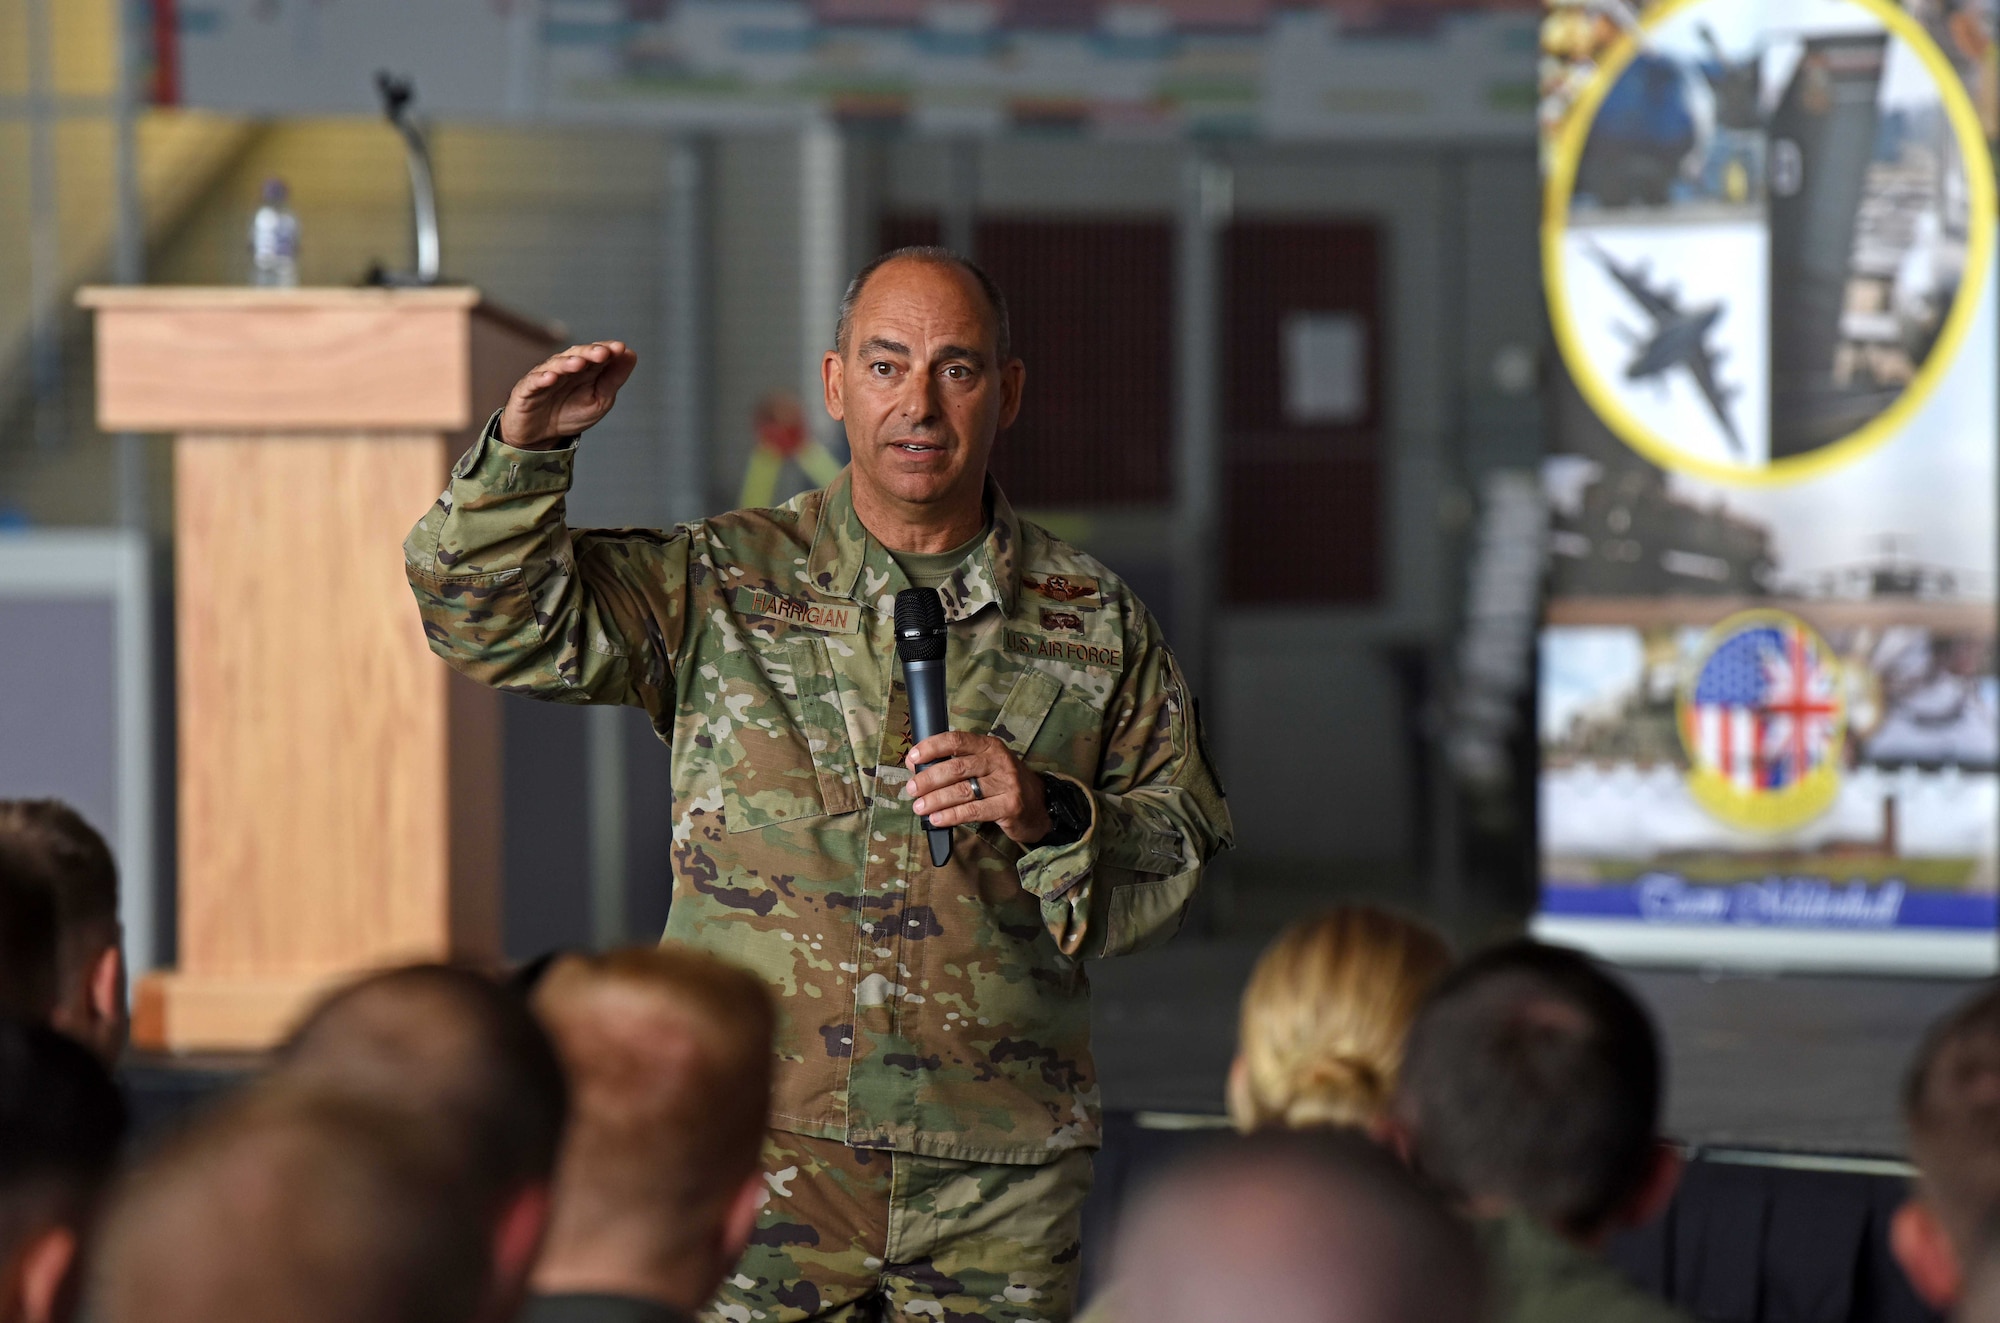 U.S. Air Force Gen. Jeff Harrigian, U.S. Air Forces in Europe - Air Forces Africa commander, discusses his priorities during an all-call at Hangar 814 on RAF Mildenhall, England, July 15, 2019. During the visit, Harrigian stressed the importance of strengthening partnerships through various exercises and a shared, common goal. (U.S. Air Force photo by Airman 1st Class Brandon Esau)